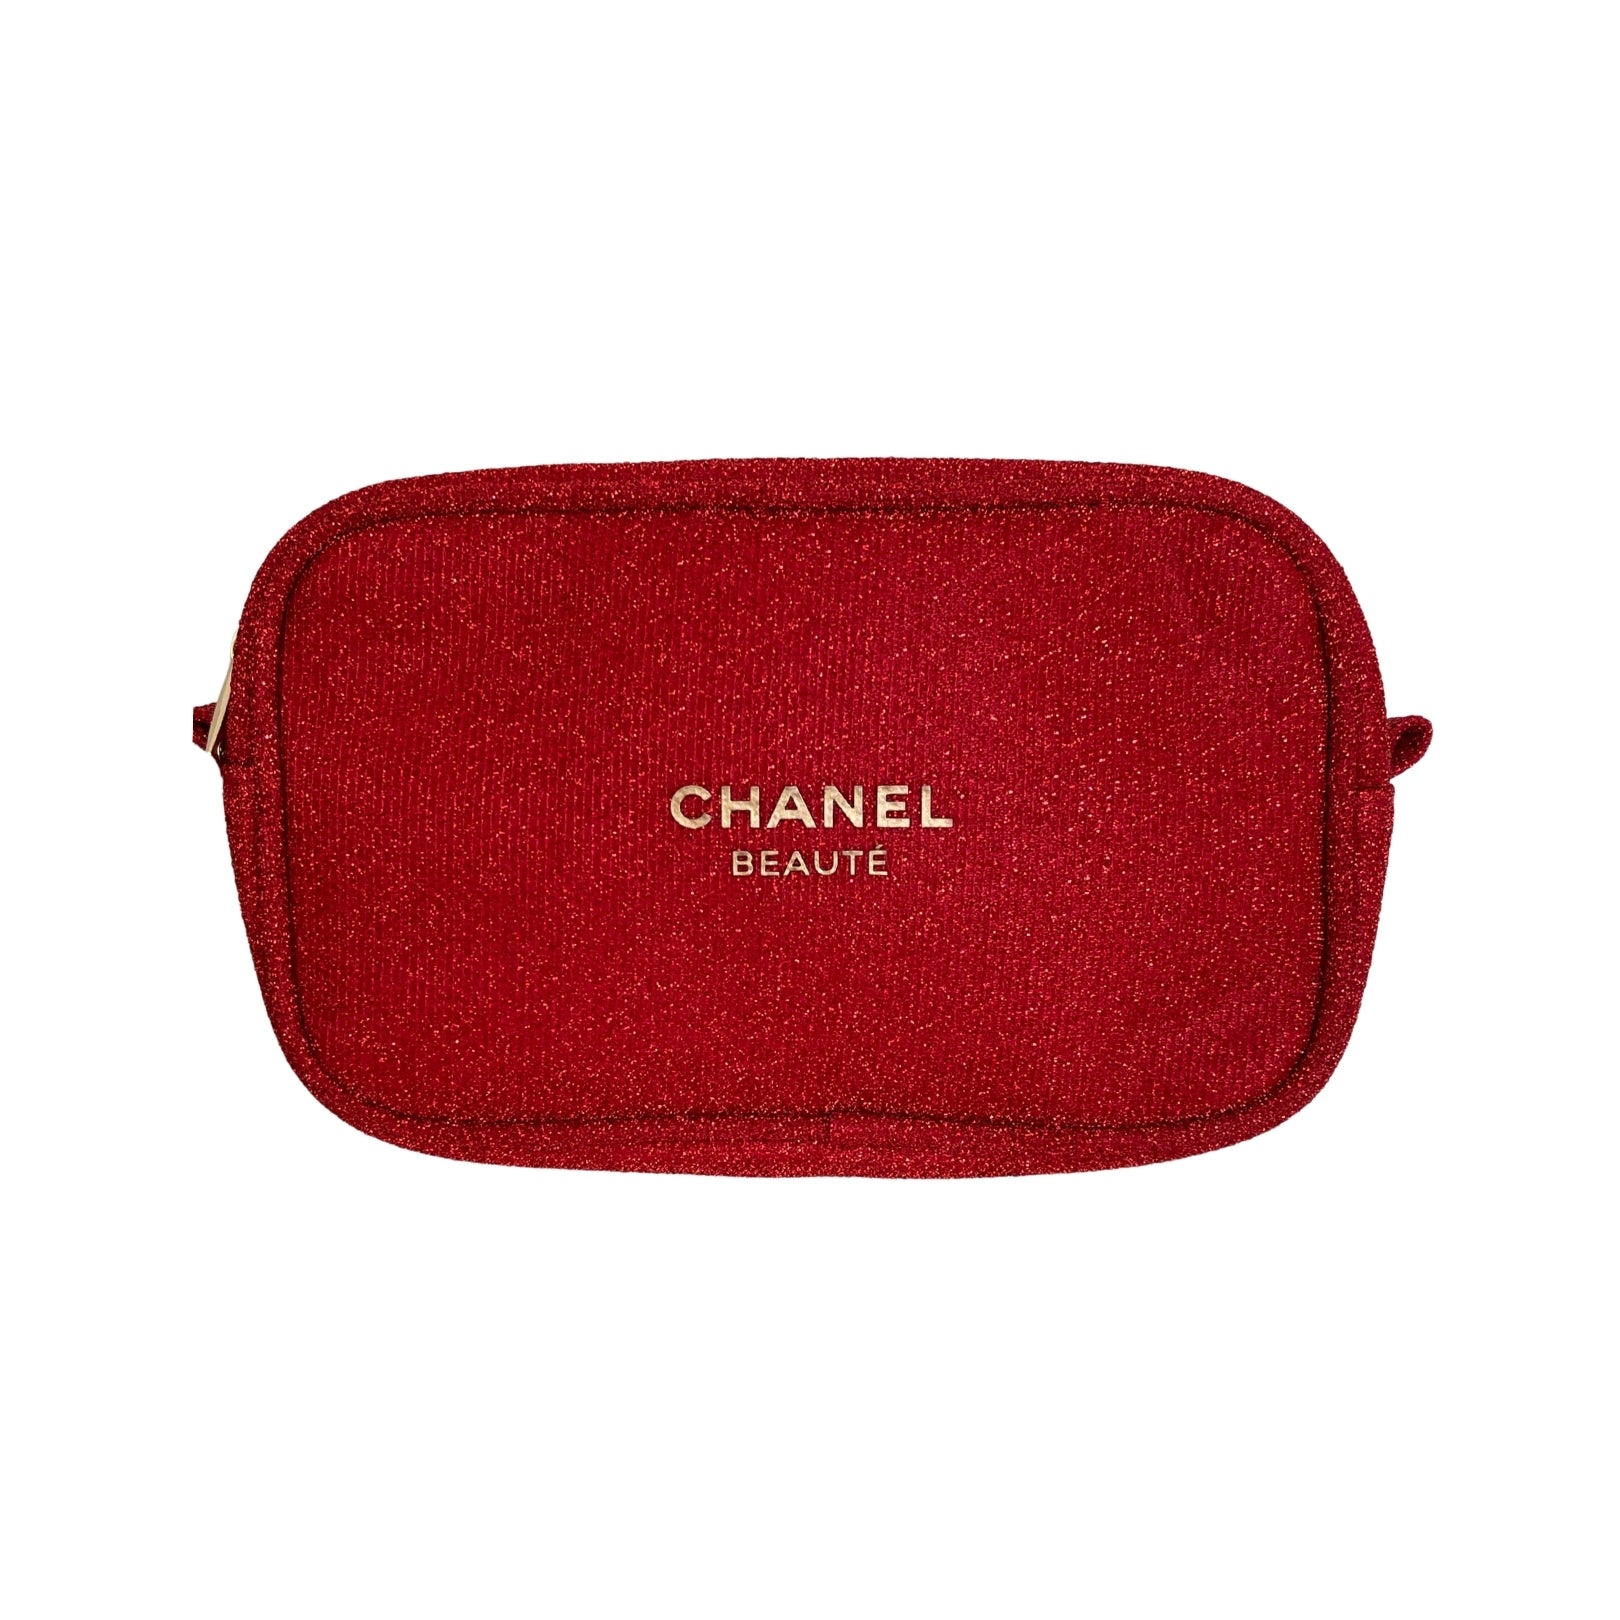 CHANEL Beaute Cosmetic Makeup Bag Pouch Clutch Sparkling RED GOLD w/ gift  box